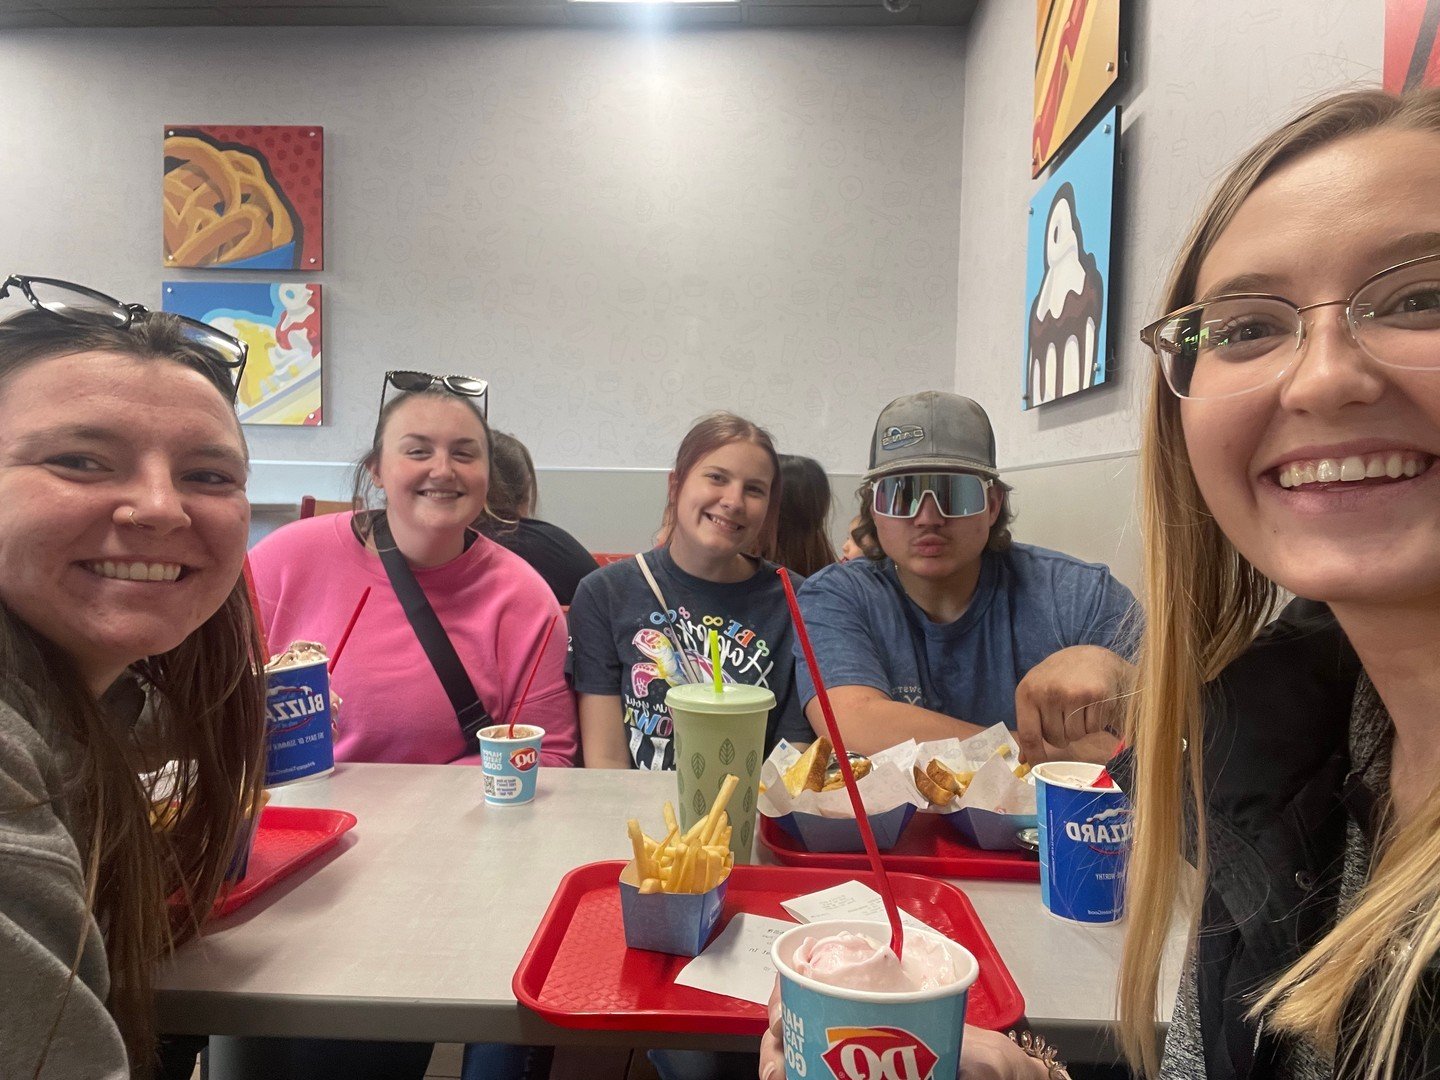 Reminder Young Adult Ministry Gathering is today!🎉
🗓️When: Tuesday, April 16th 6:30PM
📍Where: Camp UMM Williston Office - 721 East Highland Dr., Suite B Williston, ND 58801 (next to Jimmy Johns)

All Young Adults ages 18-23 are welcome!

Here's a 